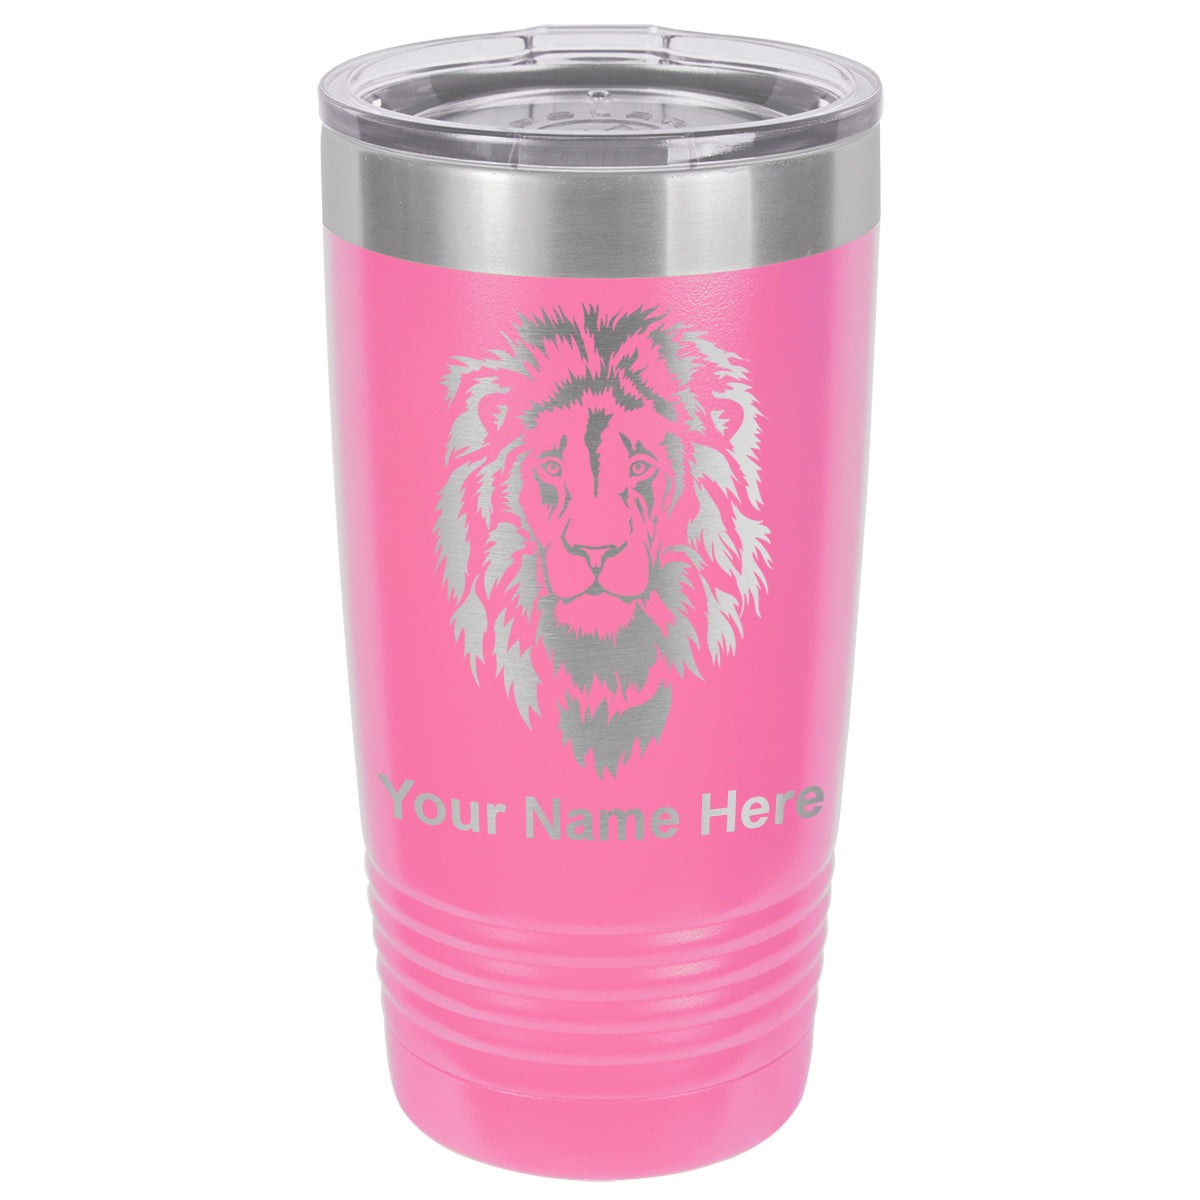 20oz Vacuum Insulated Tumbler Mug, Lion Head, Personalized Engraving Included